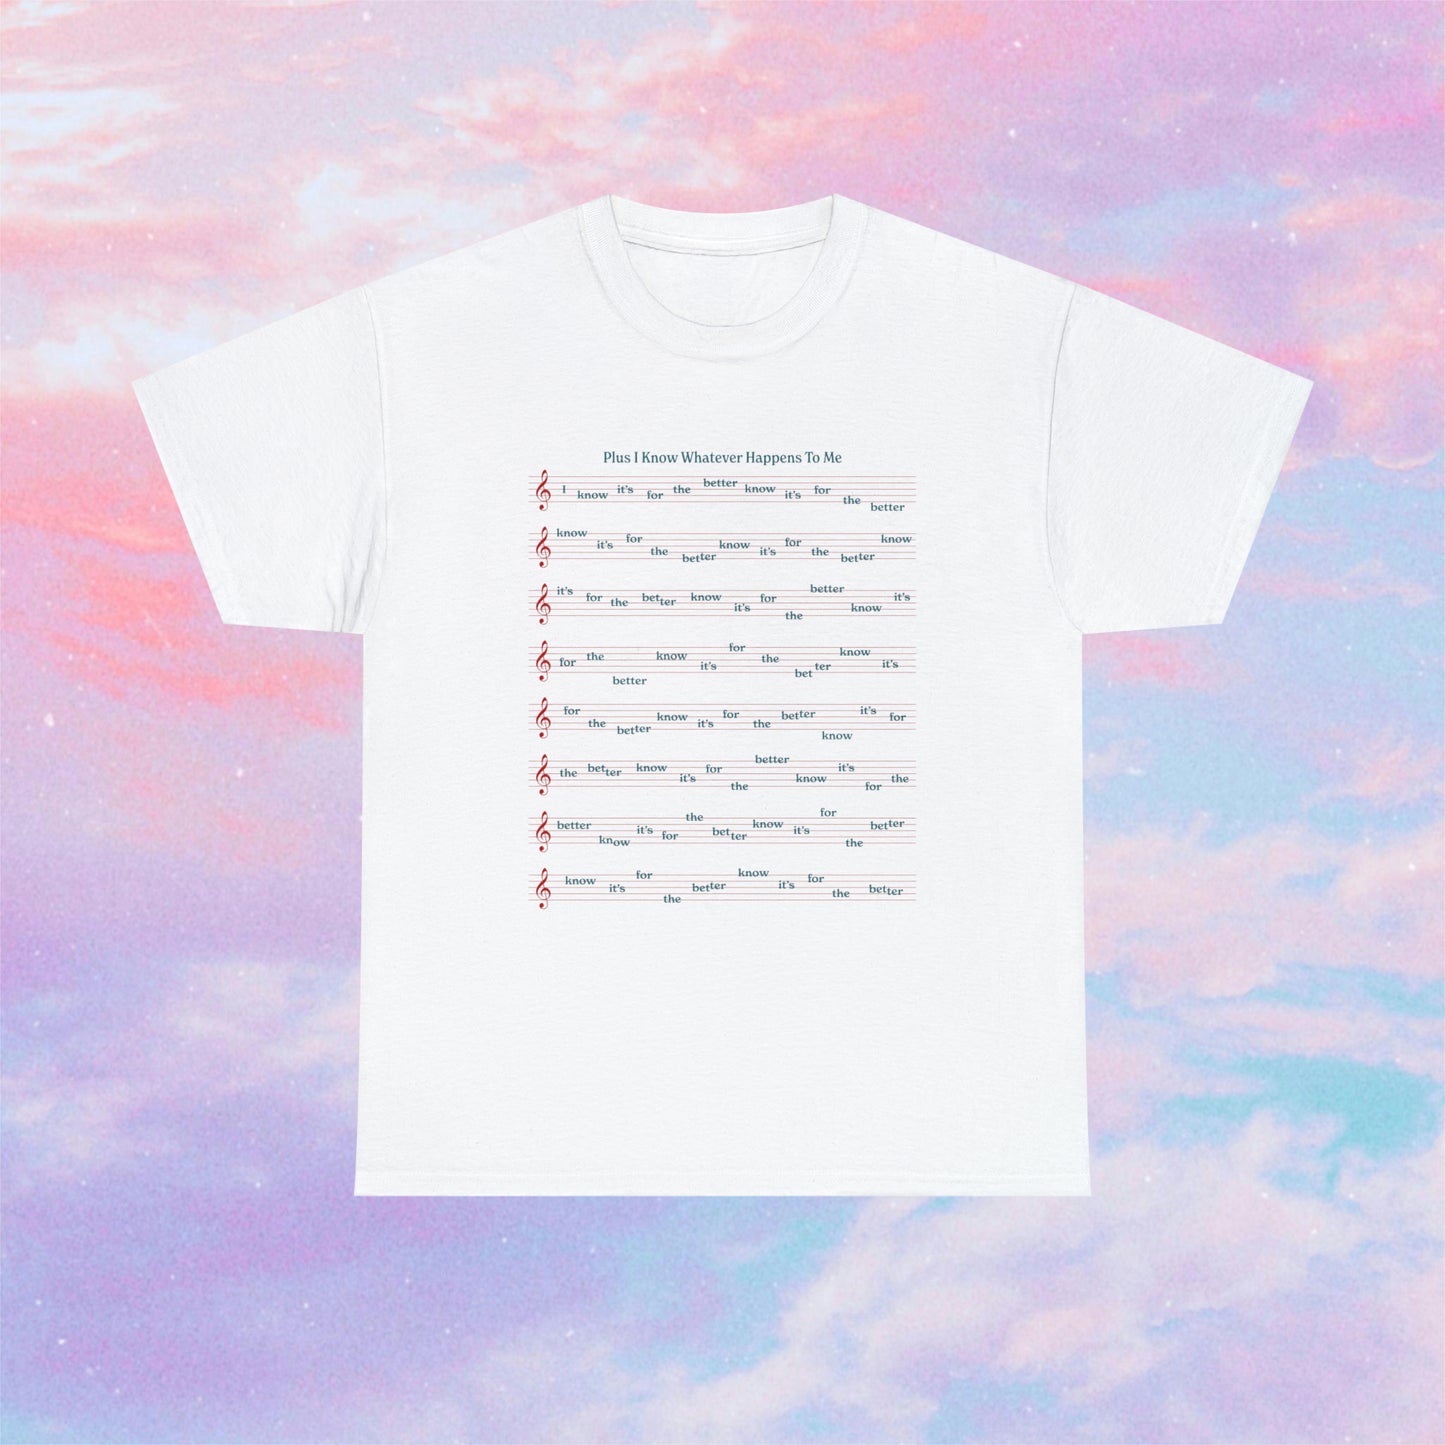 For The Better ONE-SIDED tee